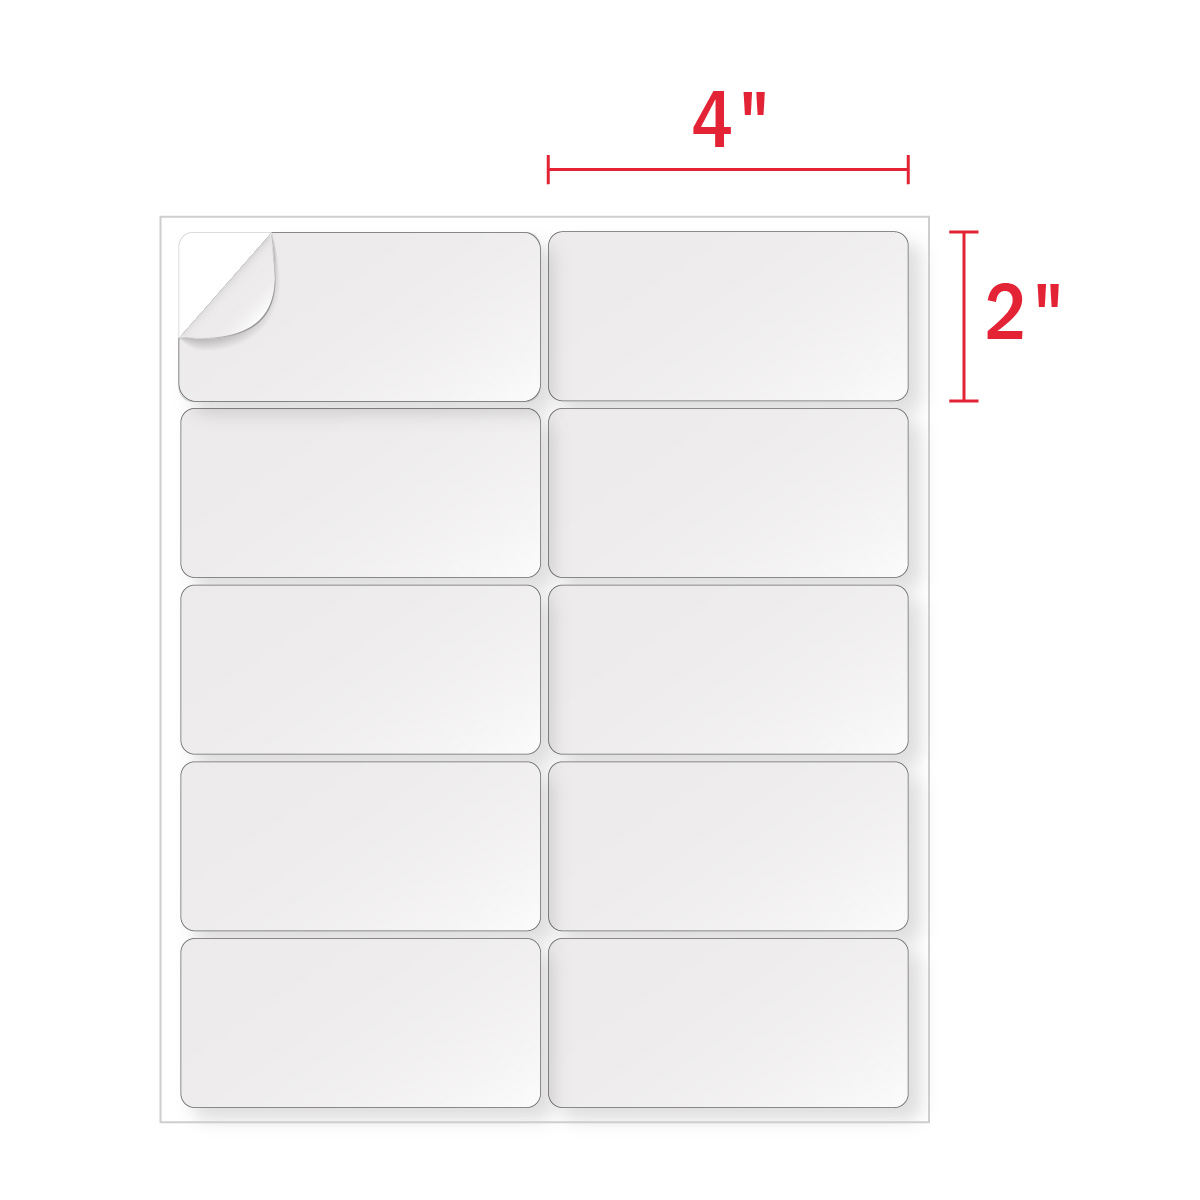 avery-4x2-labels-template